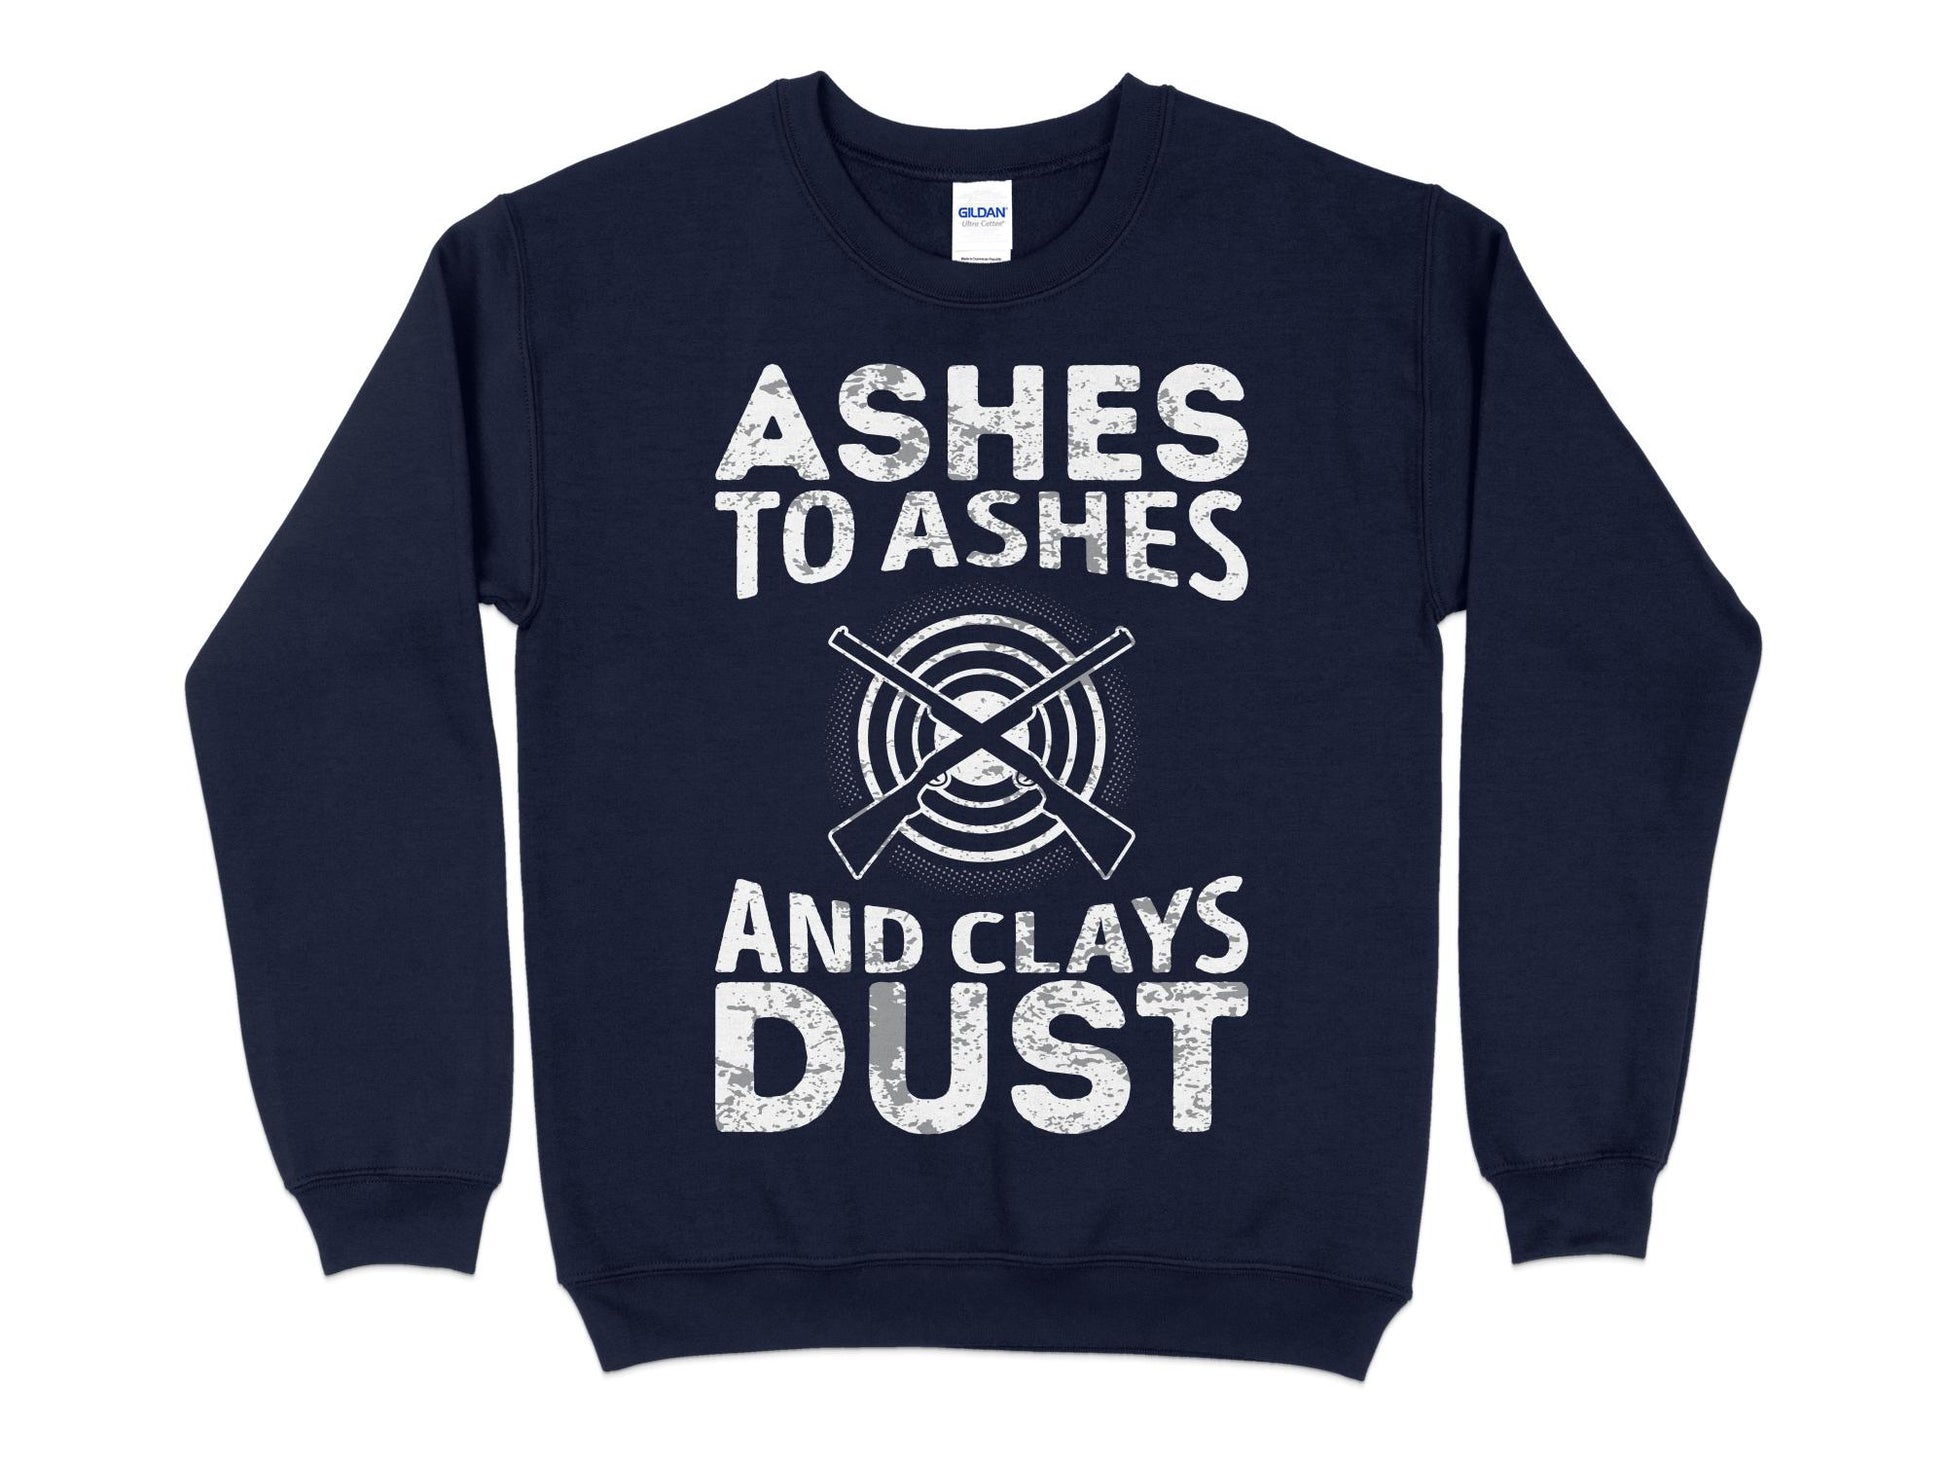 skeet shooting sweatshirt ashes to ashes and clays to dust navy blue